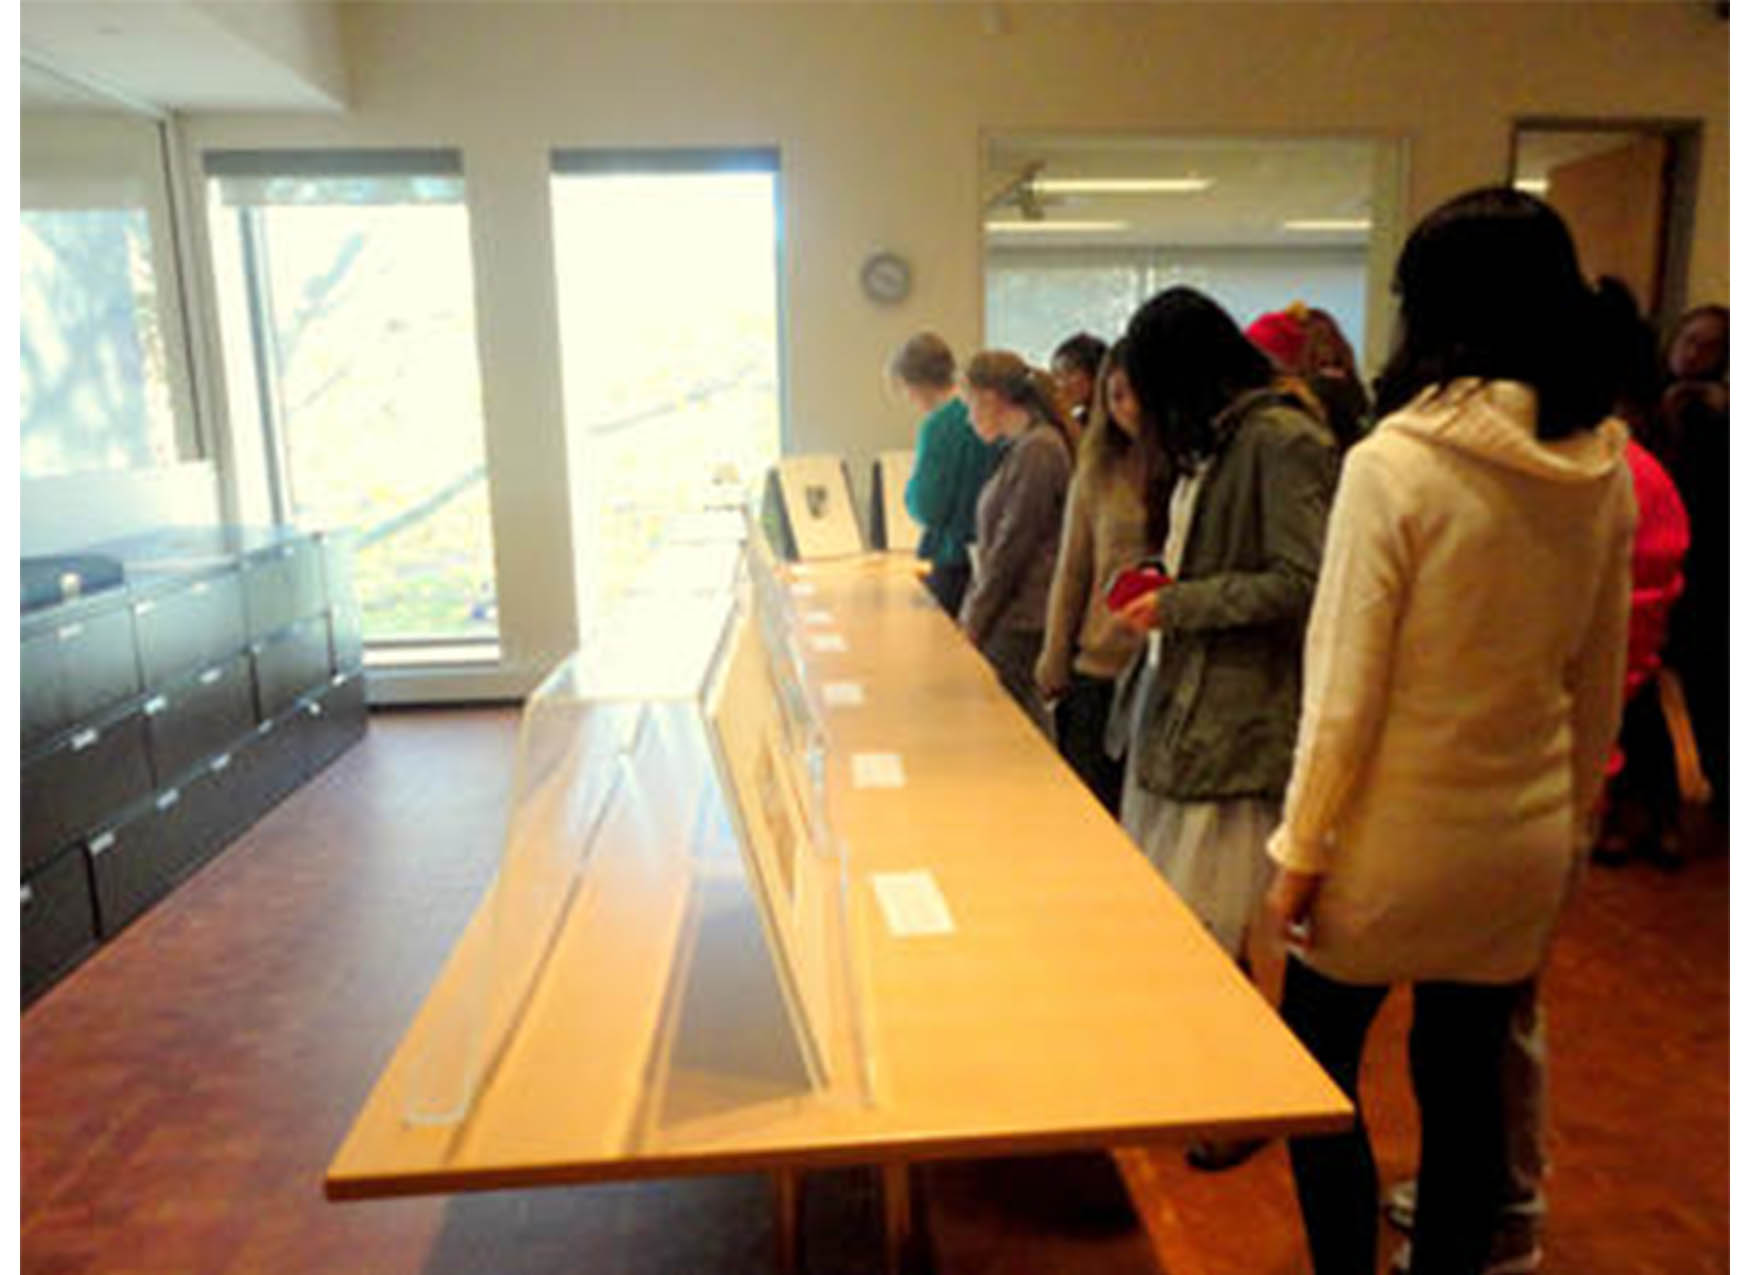 art gallery, with a table lined with prints and students looking at the art